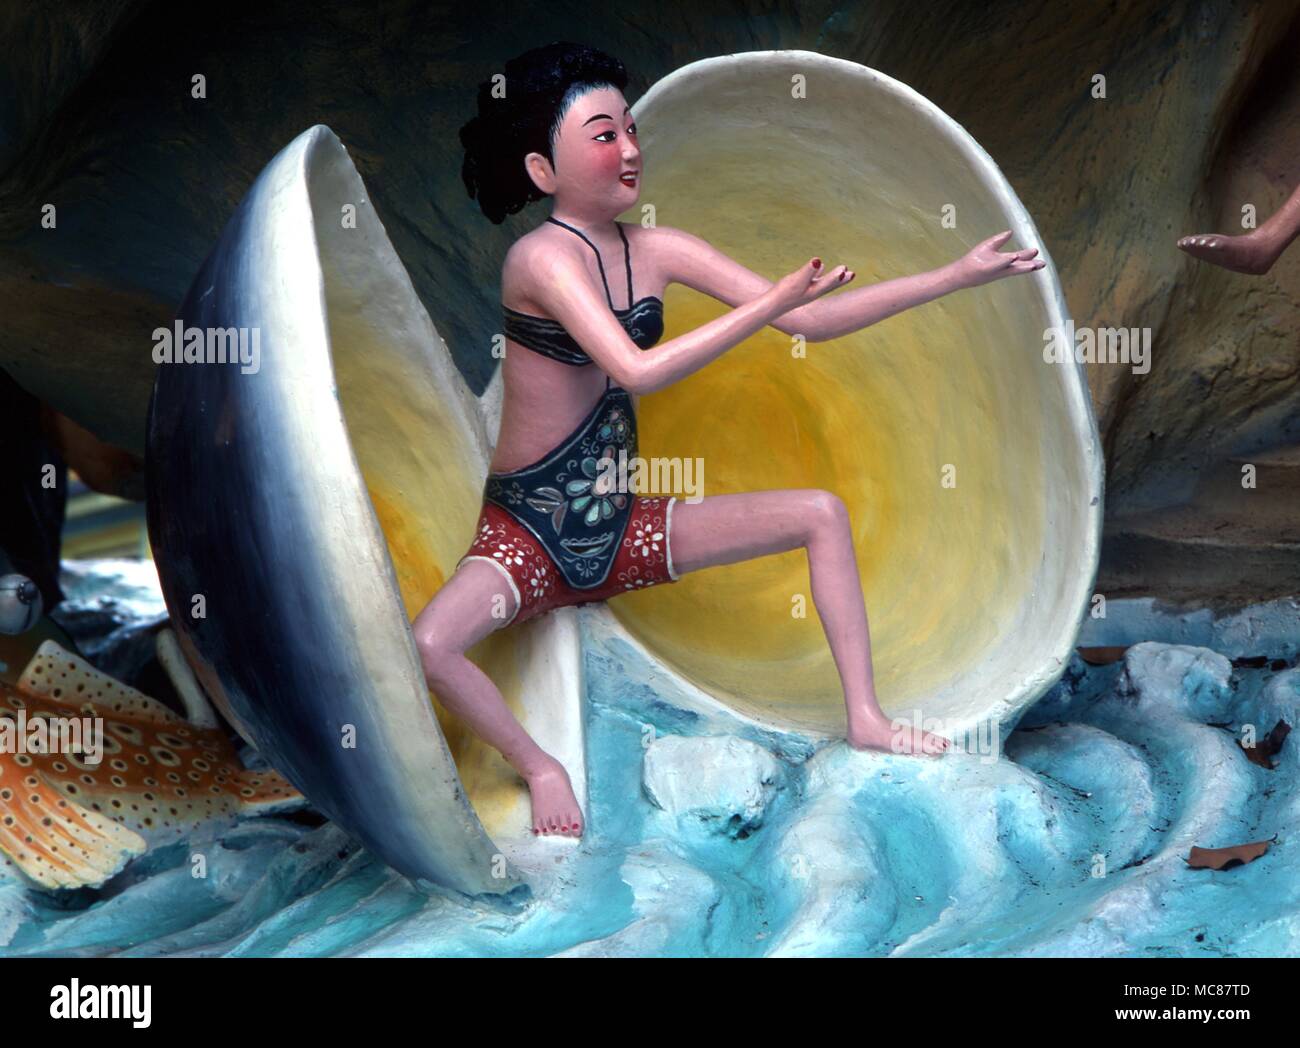 Chinese Mythology Goddess springing from a giant clam shell. Chinese mythological subject in Haw Par Villa (Tiger Balm Park) in Singapore Stock Photo